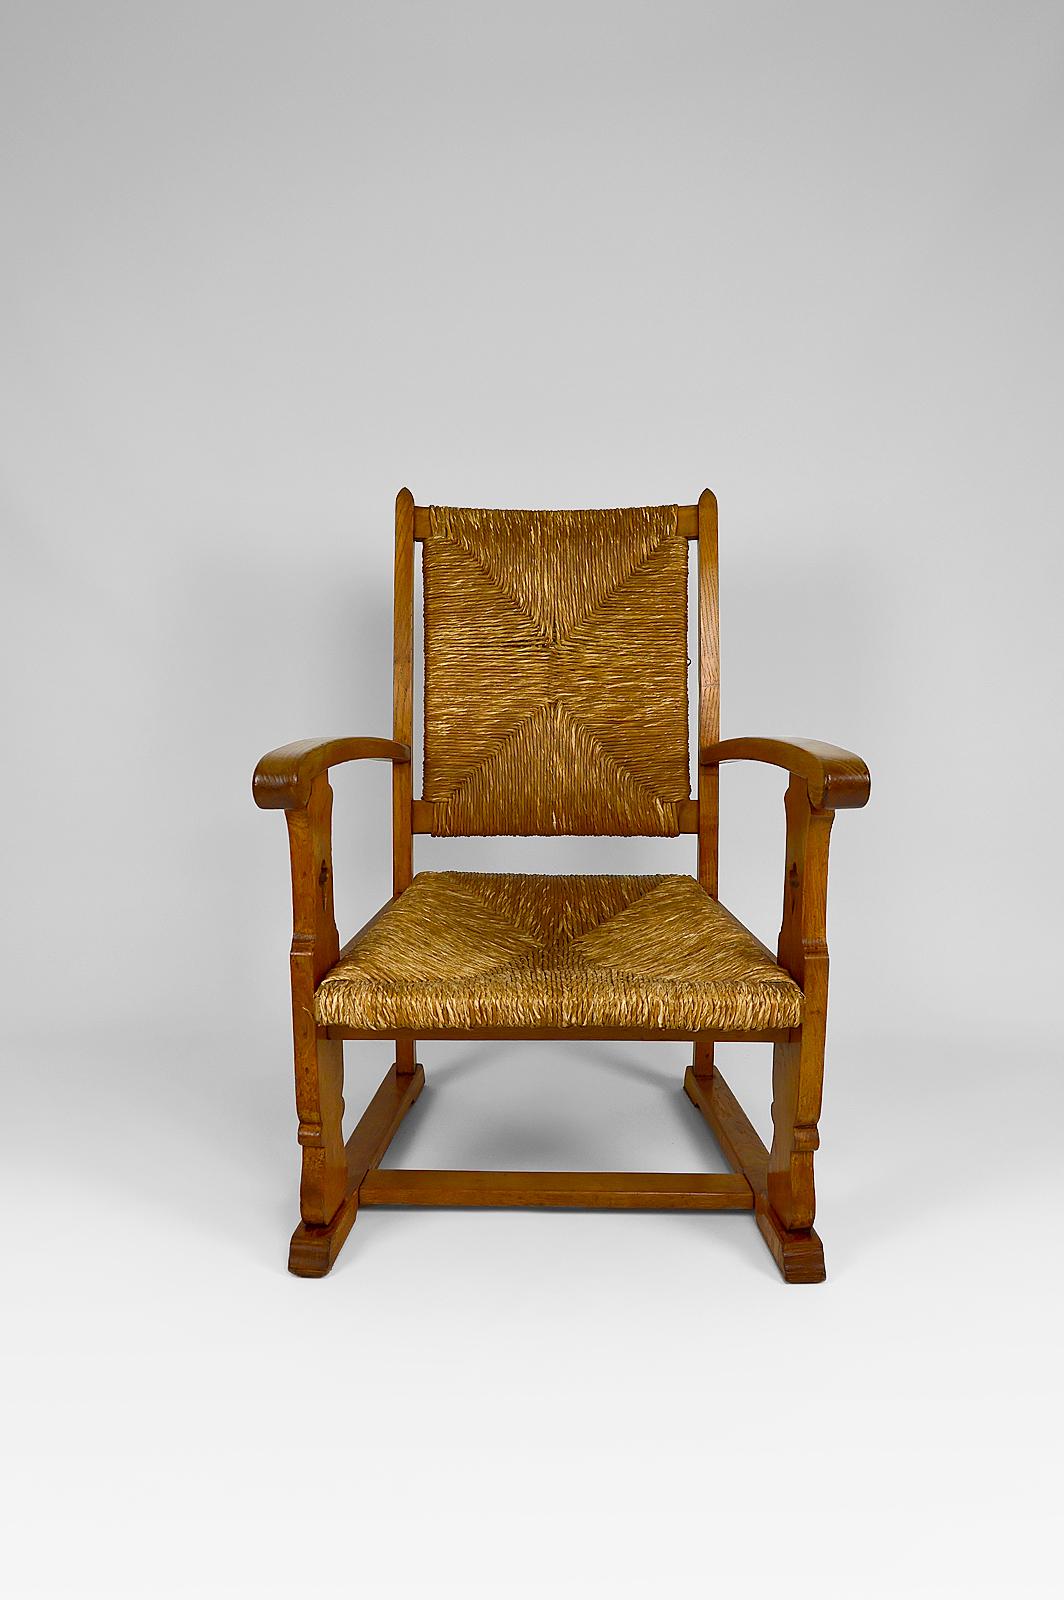 Arts and Crafts Art & Crafts / Gothic Revival Armchair in Oak and Straw, circa 1900